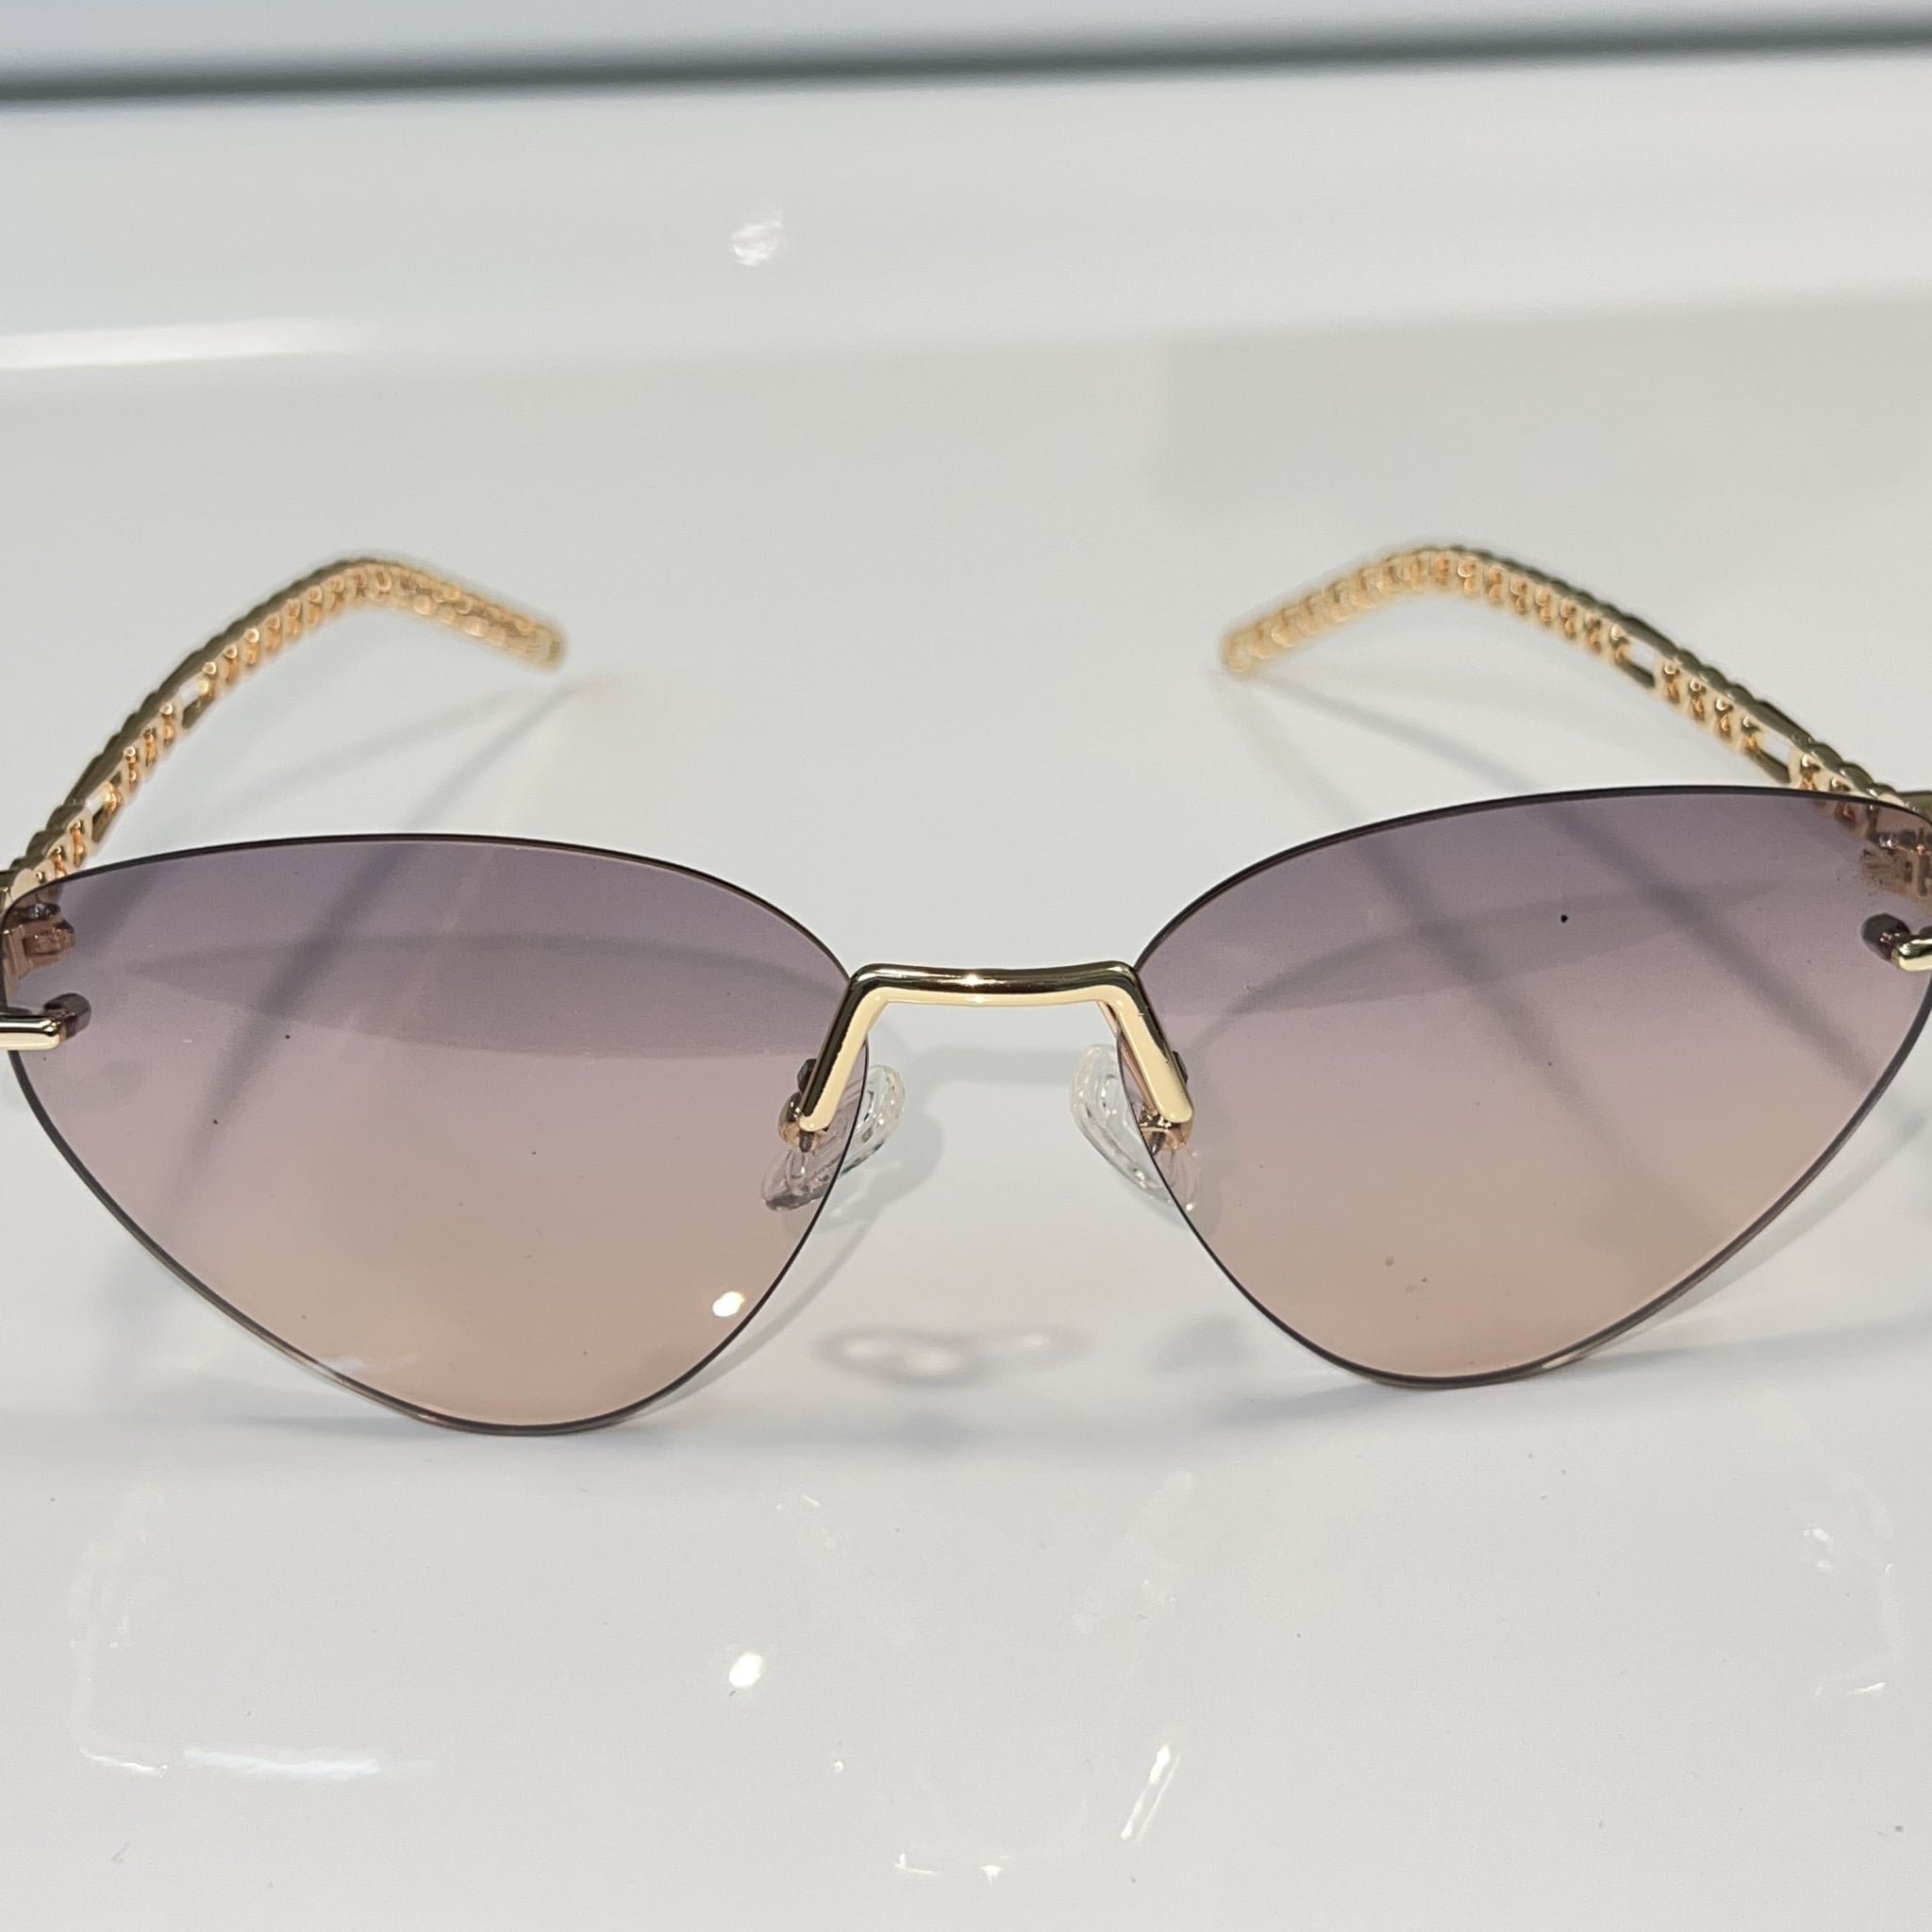 Pearl 'For Her' Glasses - 14k gold plated - Pink Shade - Sehgal Glasses